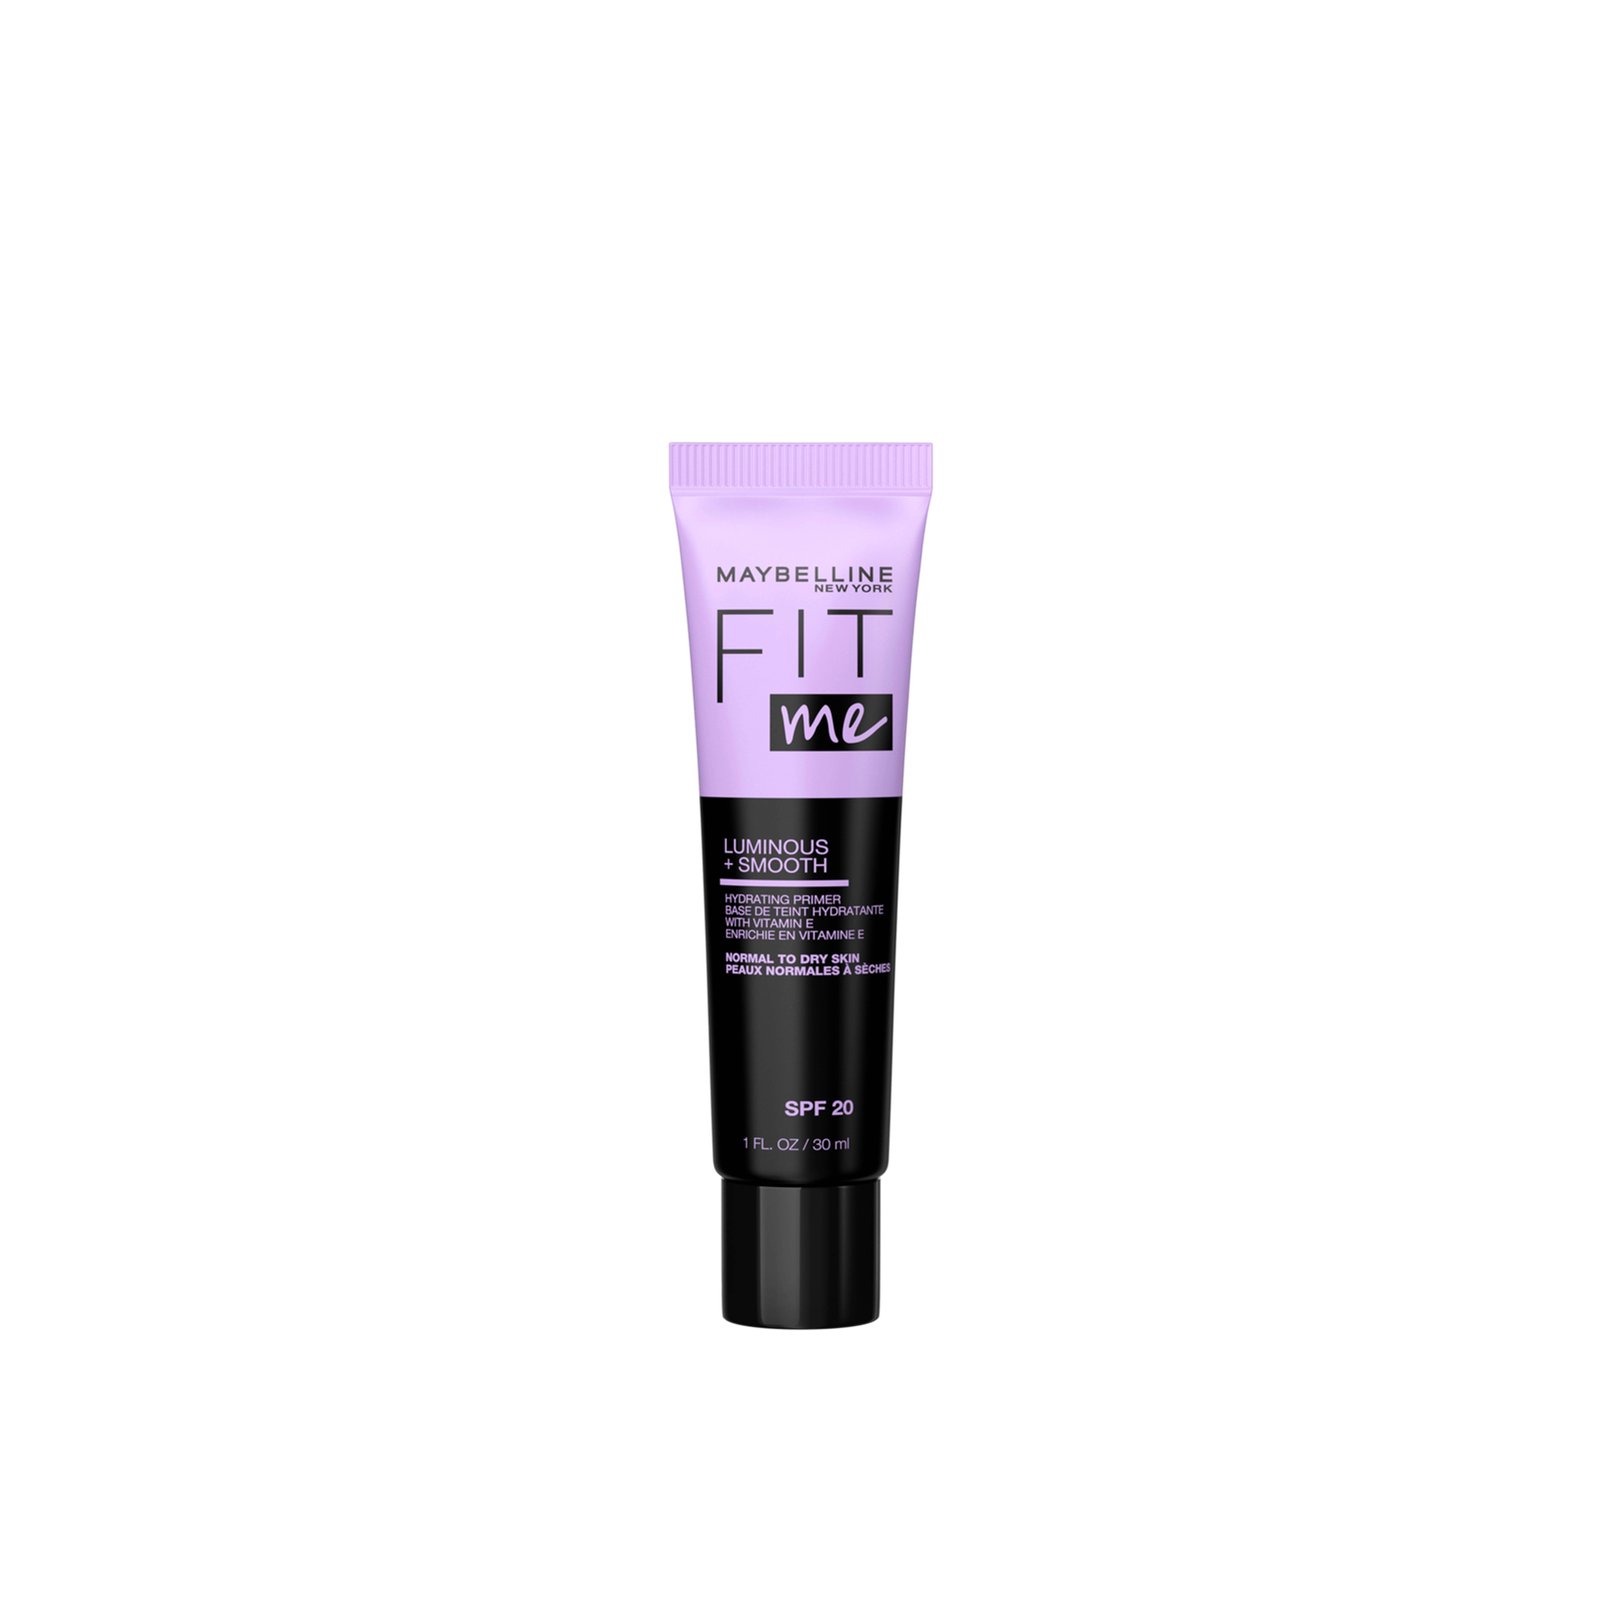 Maybelline Fit Me Luminous + Smooth Hydrating Primer SPF20 30ml (1 fl oz)